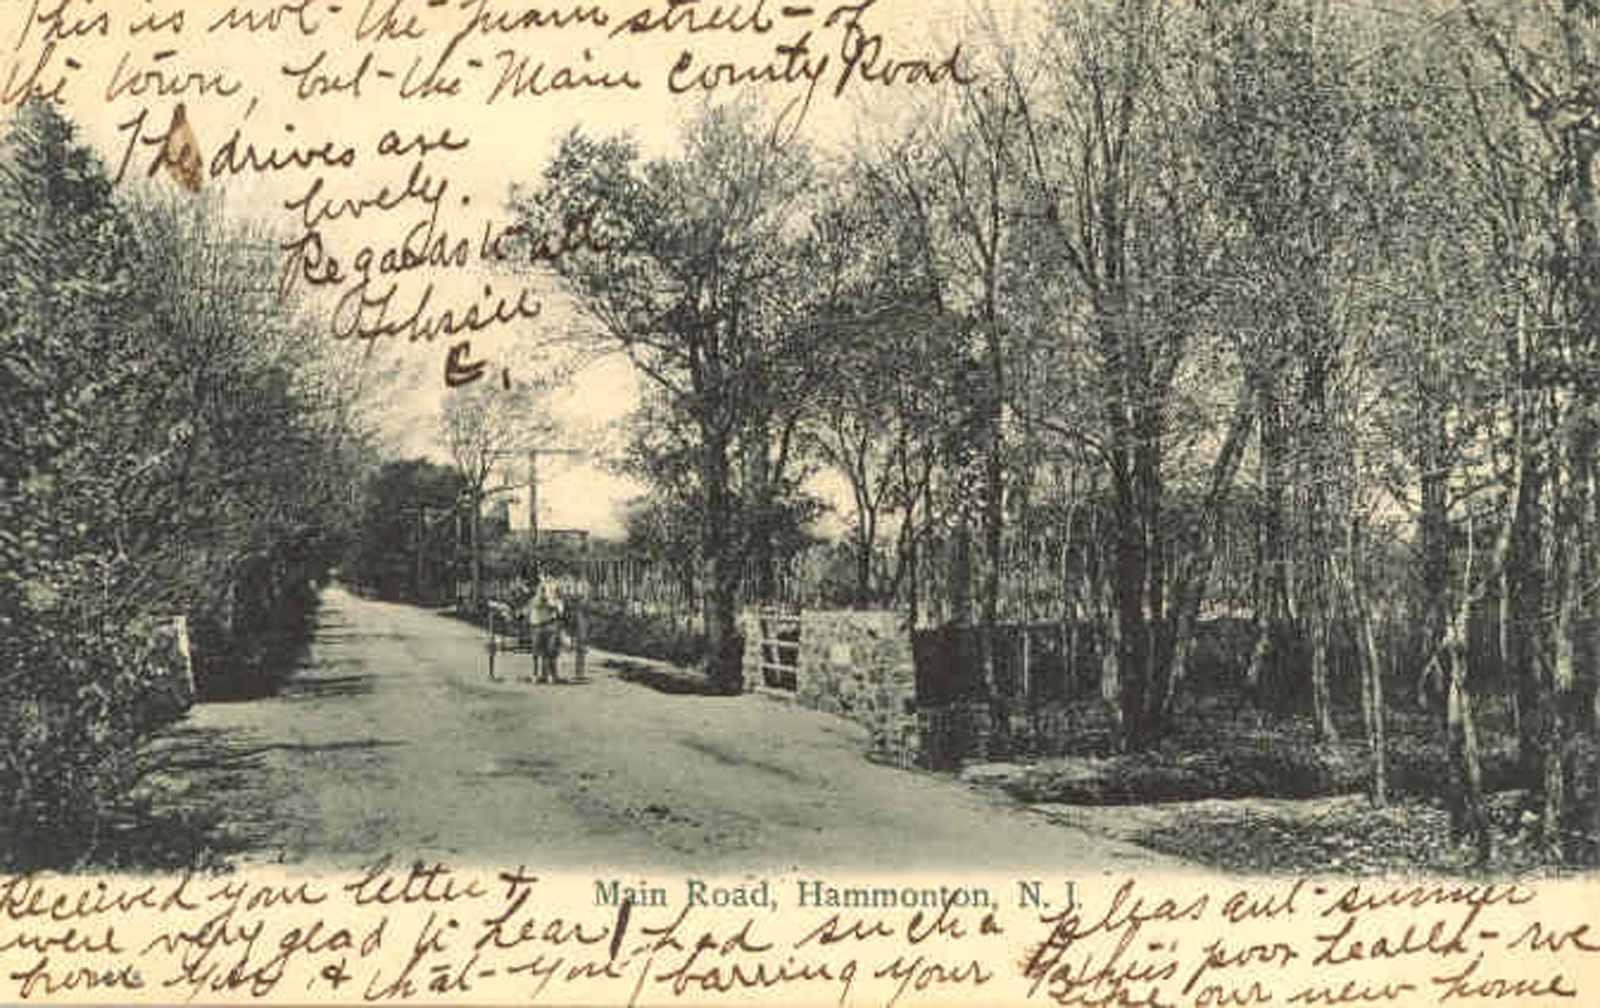 Hammonton - Main Road with horse drawn buggy - 1907